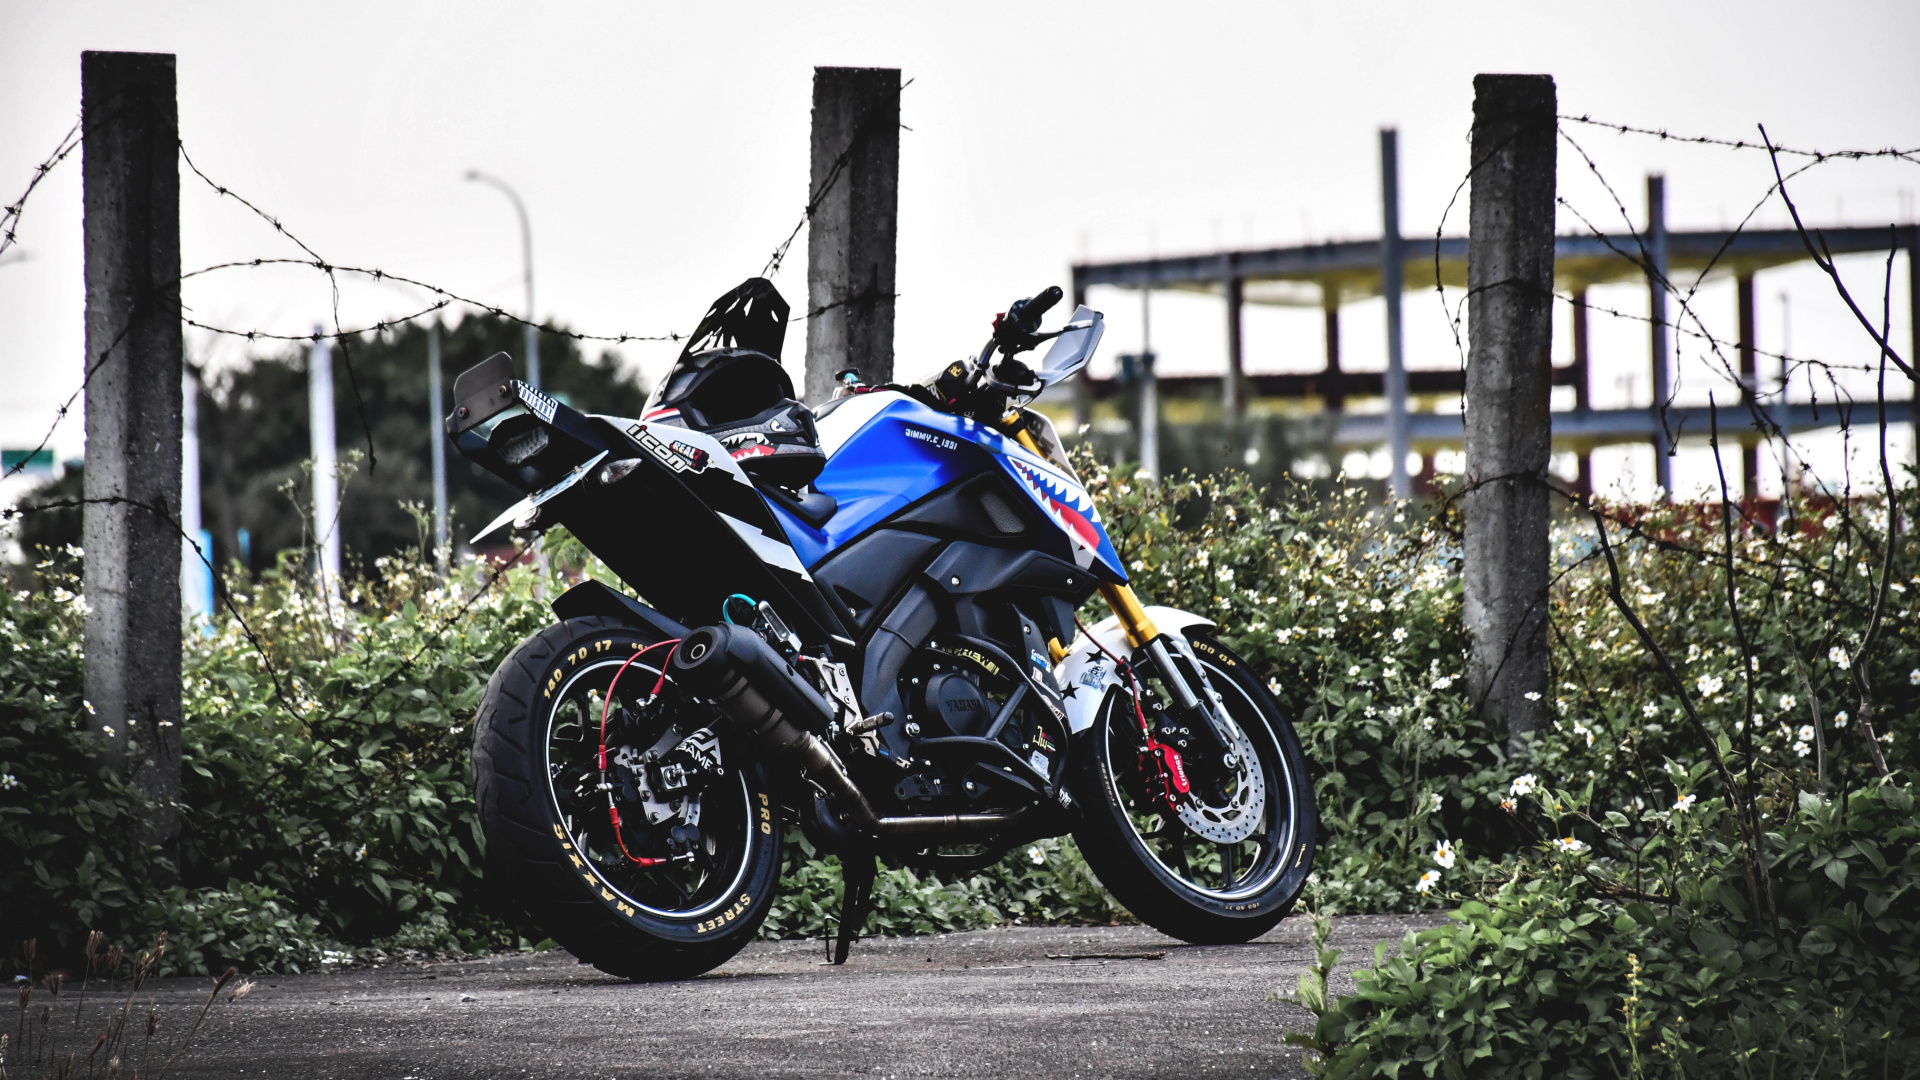 Black and Blue Sports Bike Parked on Gray Concrete Road During Daytime. Wallpaper in 1920x1080 Resolution